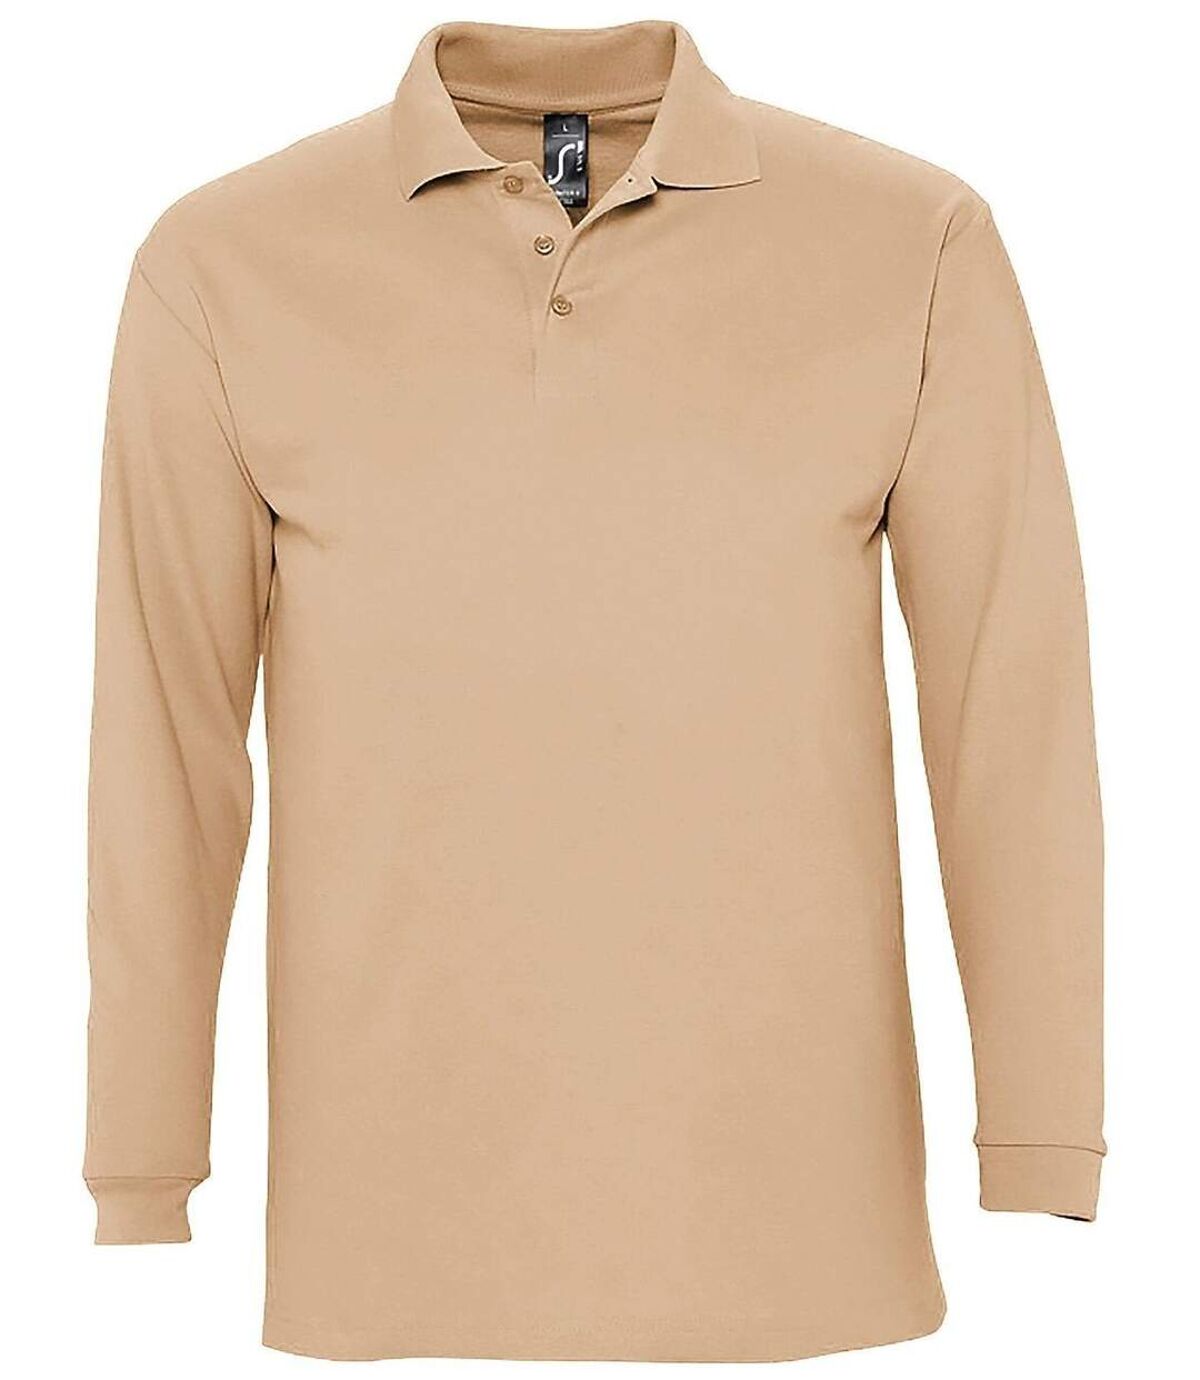 Polo manches longues - Homme - 11353 - beige sable